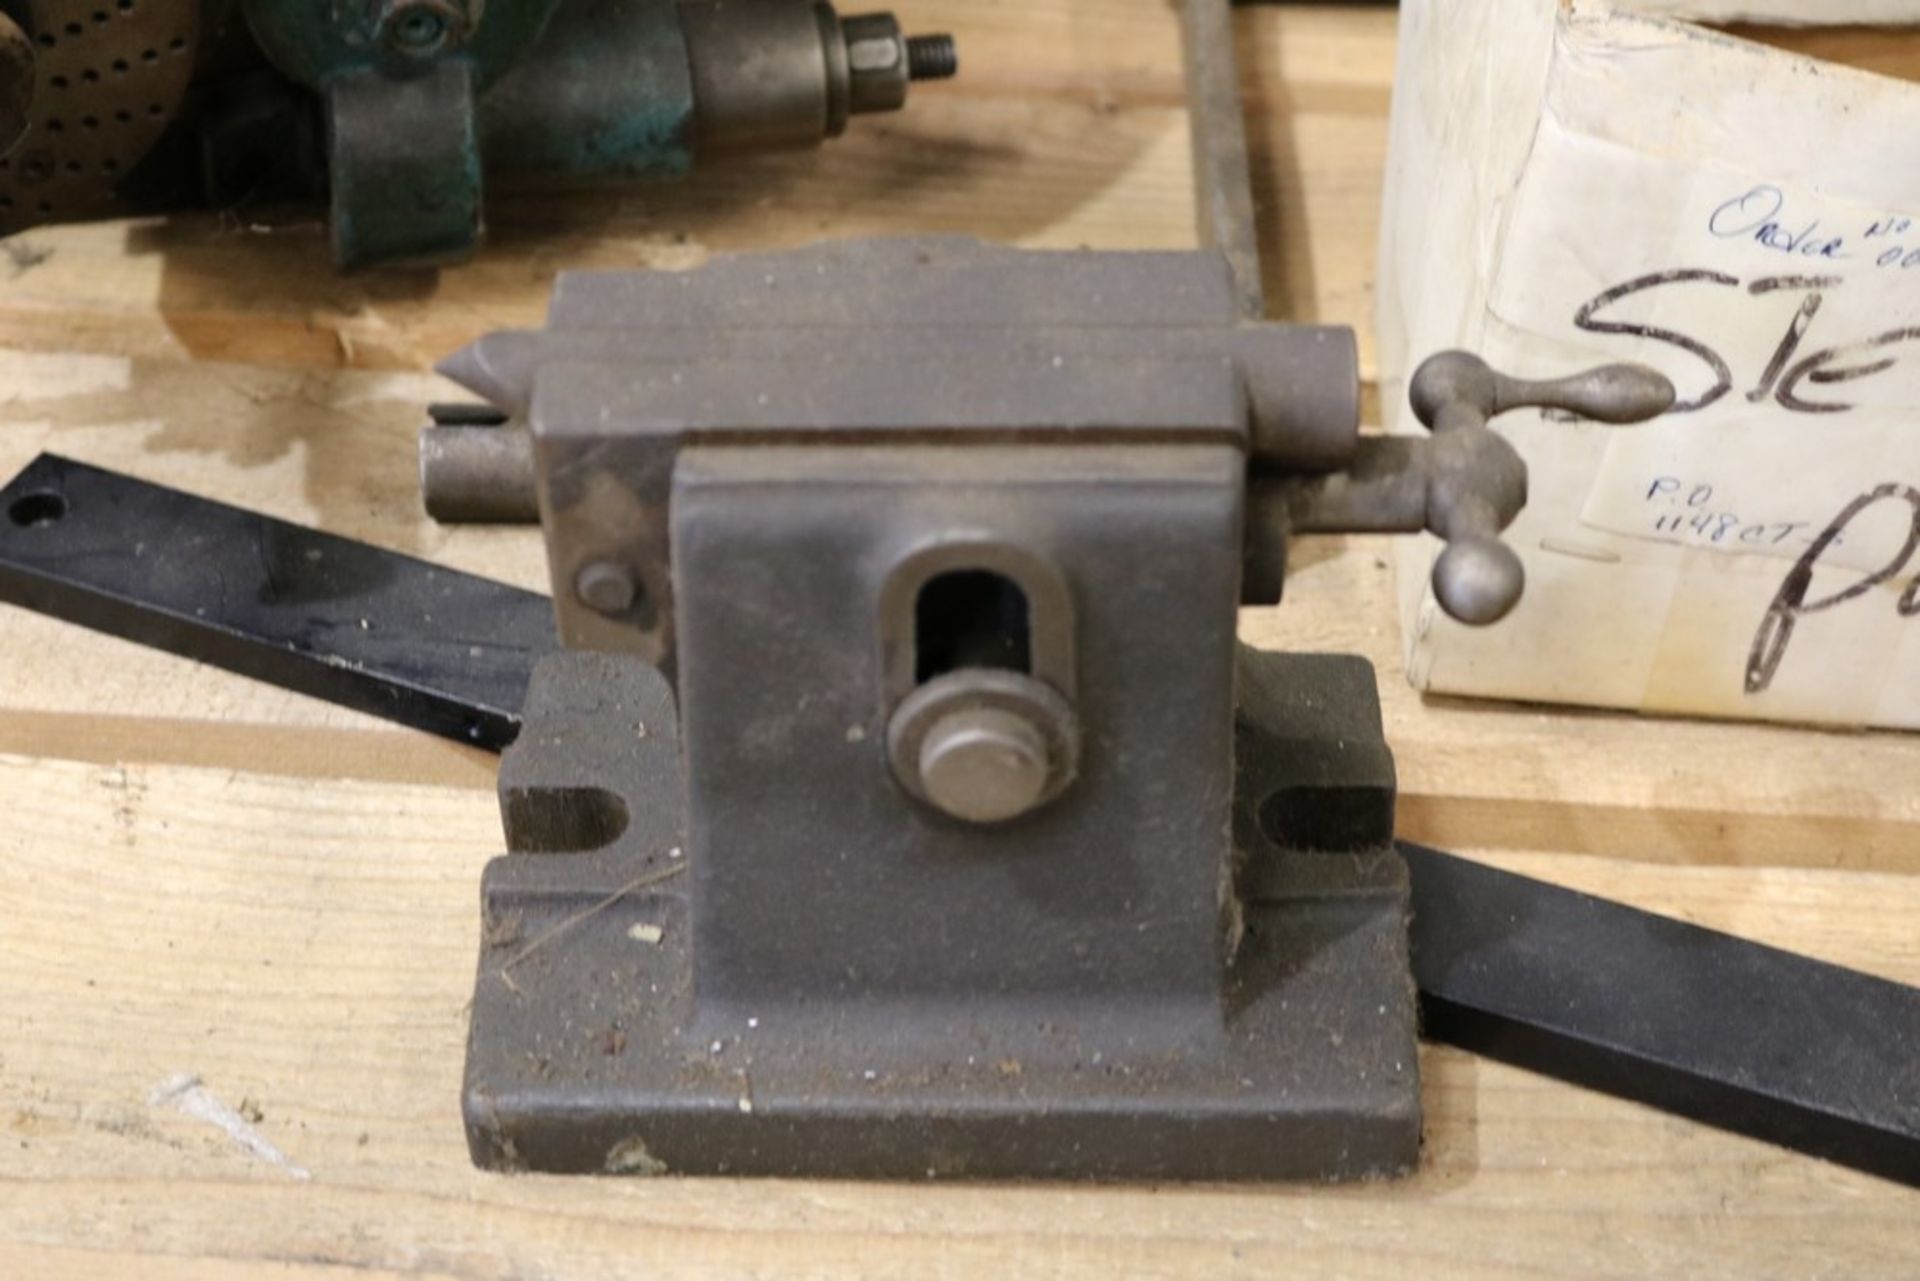 BS-2 Manual Indexing Table with Steel Dividing Plates, Tailstock and Accessories - Image 3 of 5